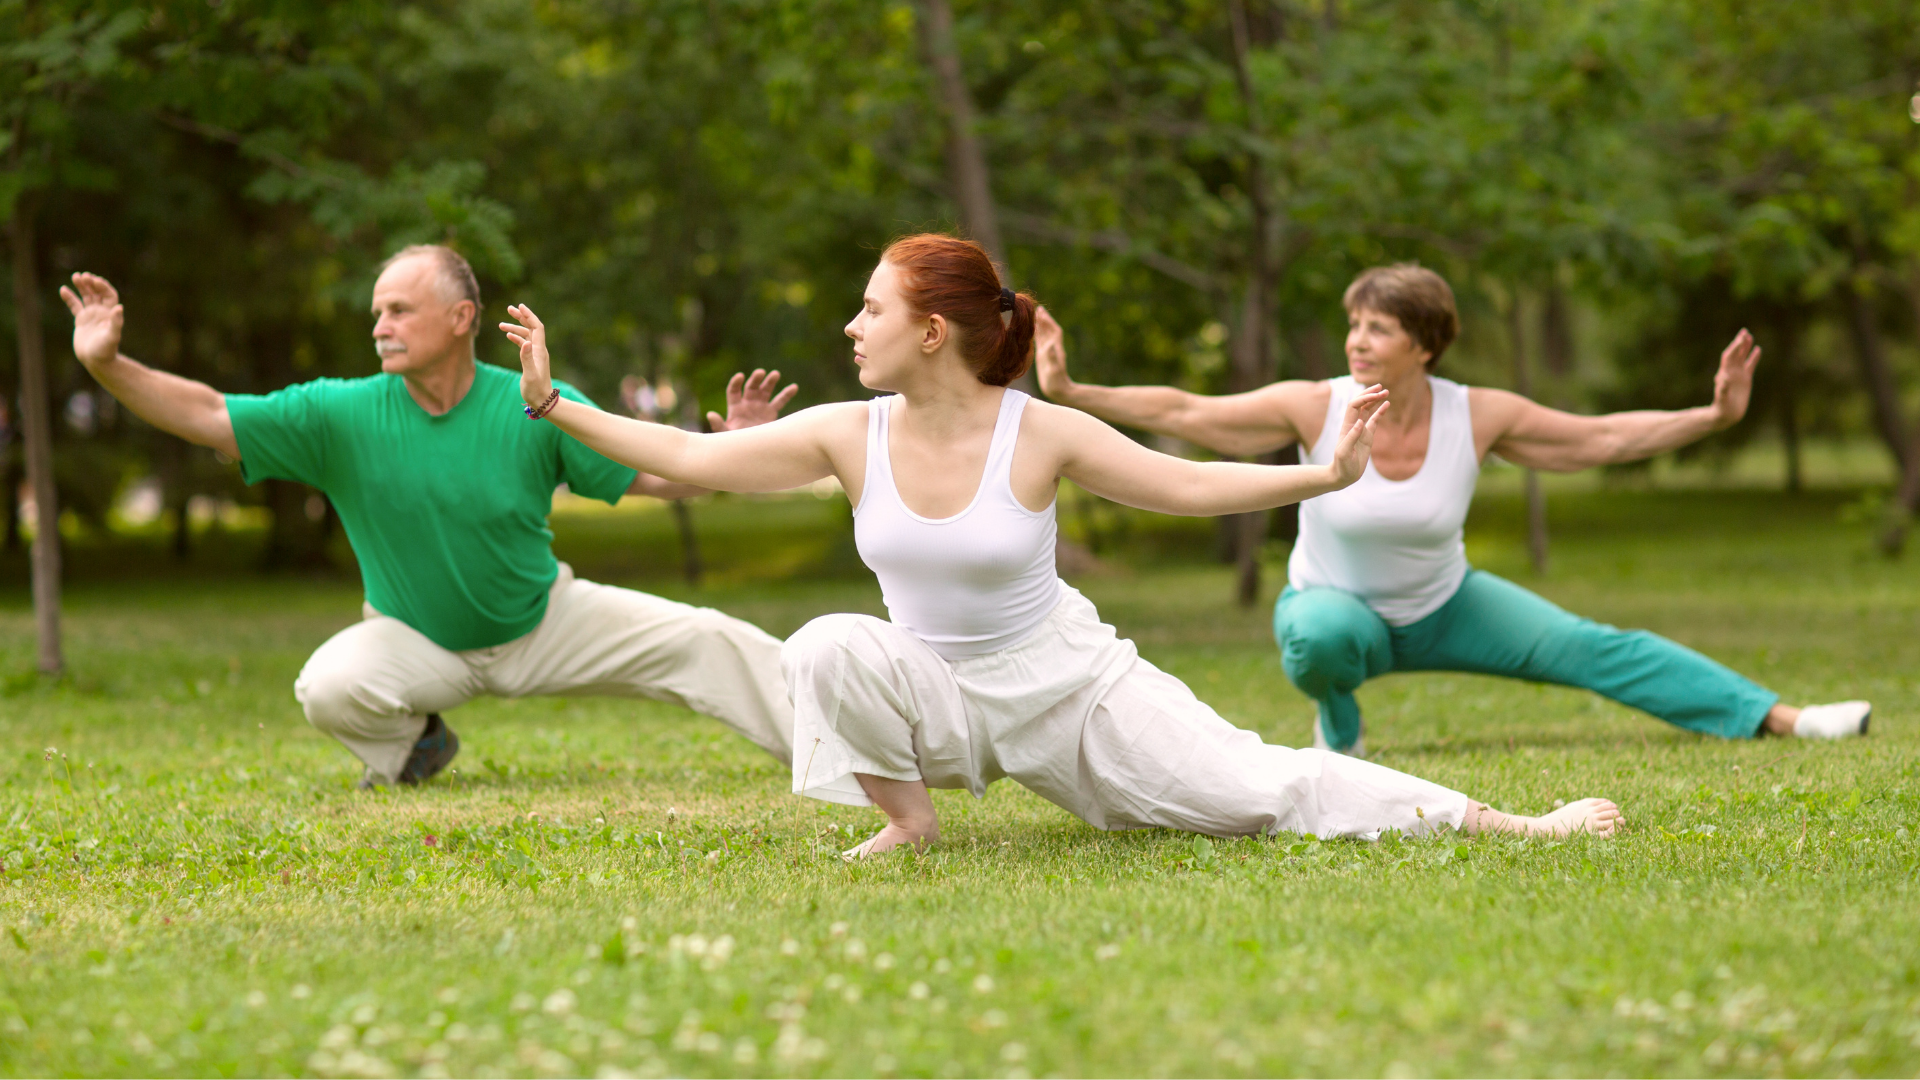 Three people doing yoga on a grass field